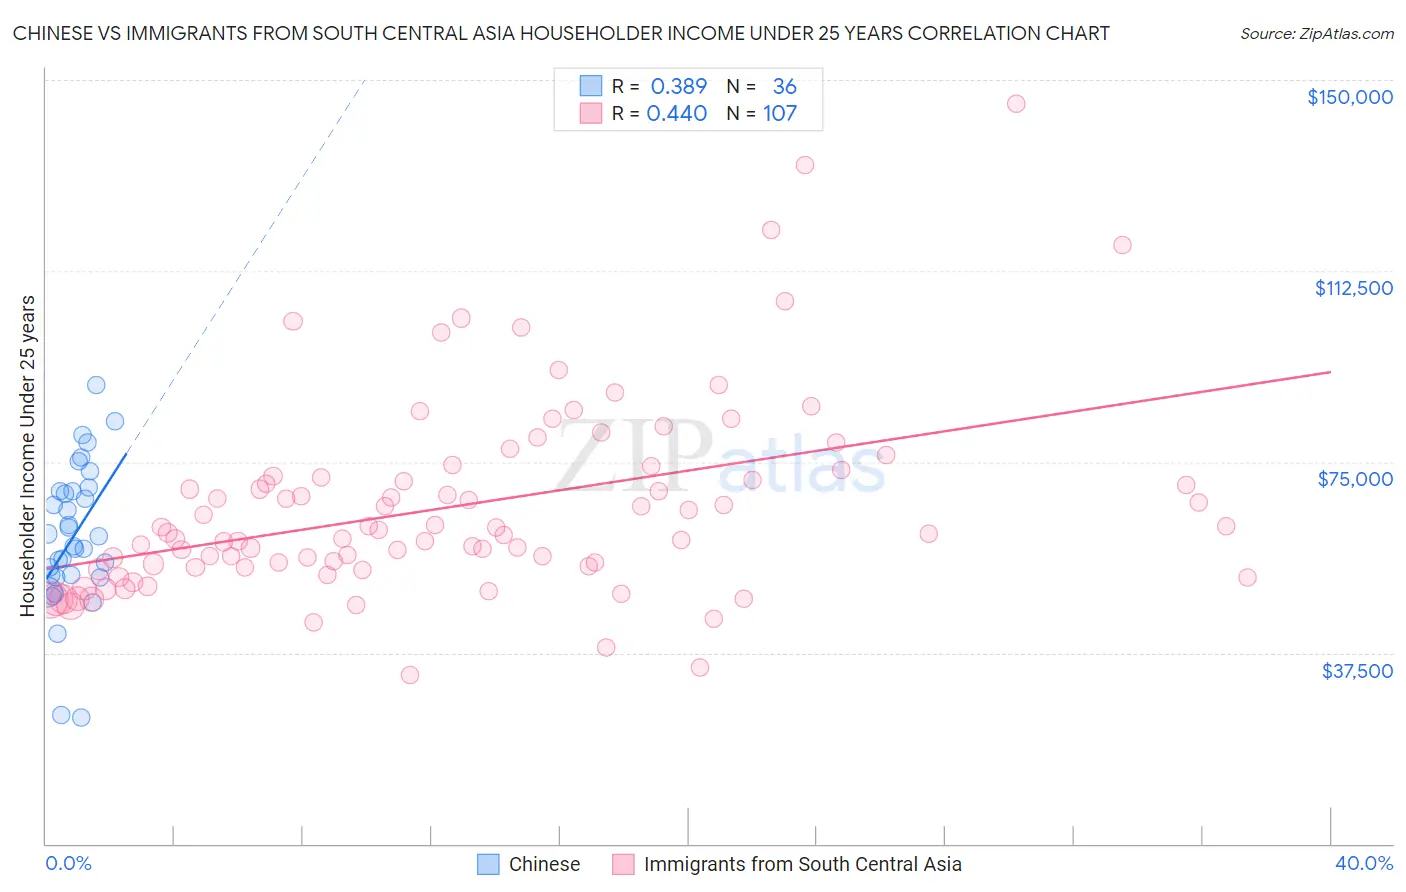 Chinese vs Immigrants from South Central Asia Householder Income Under 25 years